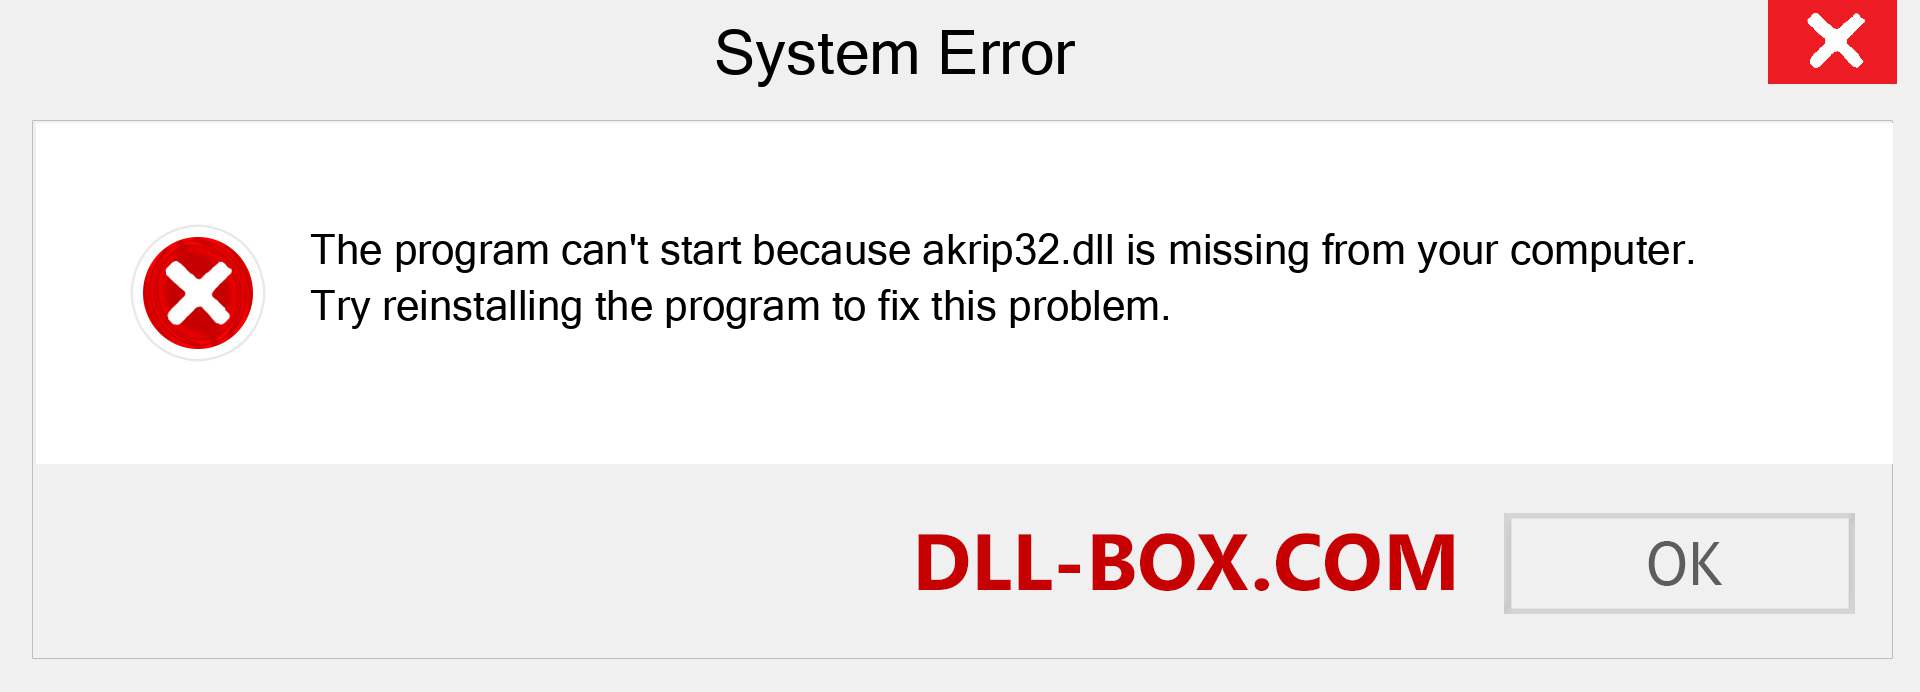  akrip32.dll file is missing?. Download for Windows 7, 8, 10 - Fix  akrip32 dll Missing Error on Windows, photos, images